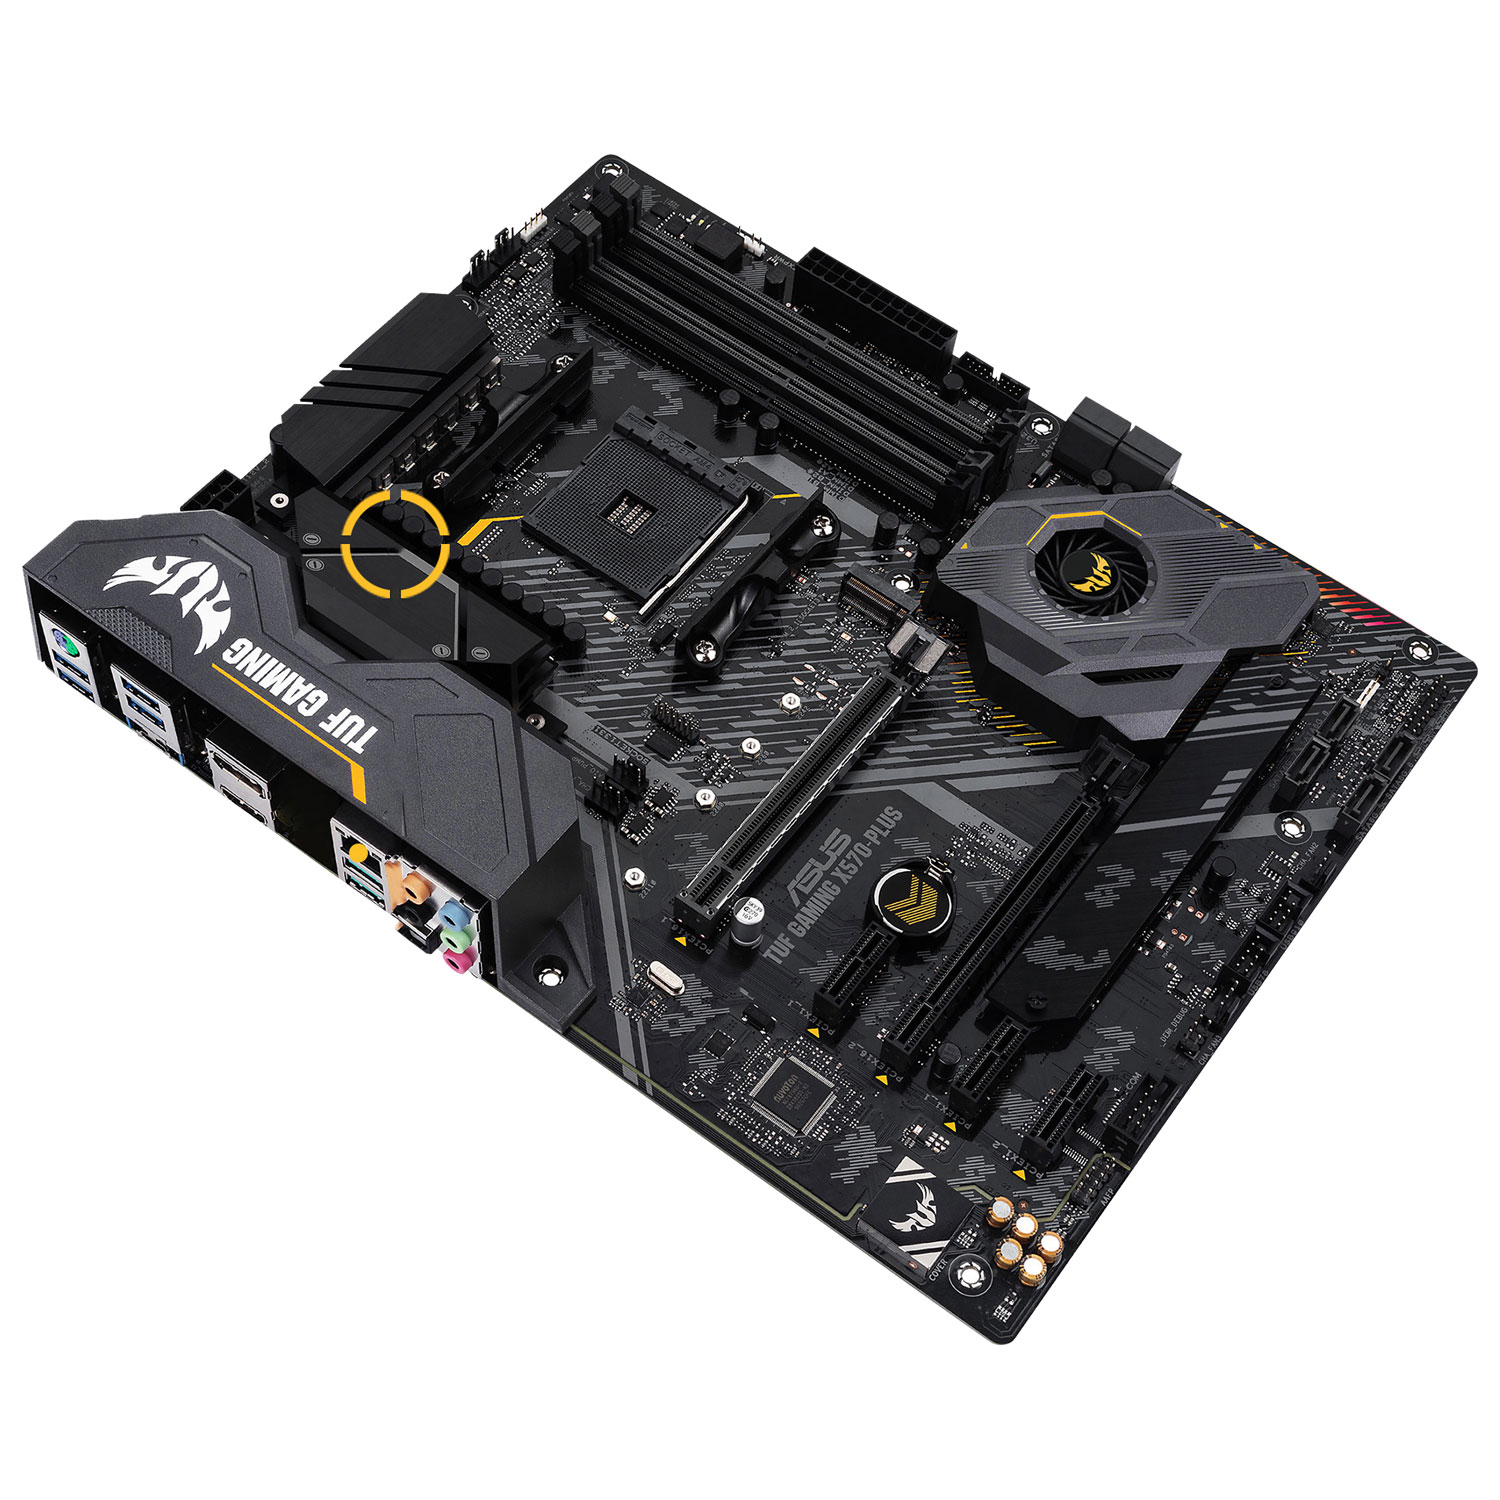 ASUS TUF Gaming X570-Plus (Wi-Fi) ATX AM4 DDR4 Motherboard for AMD 